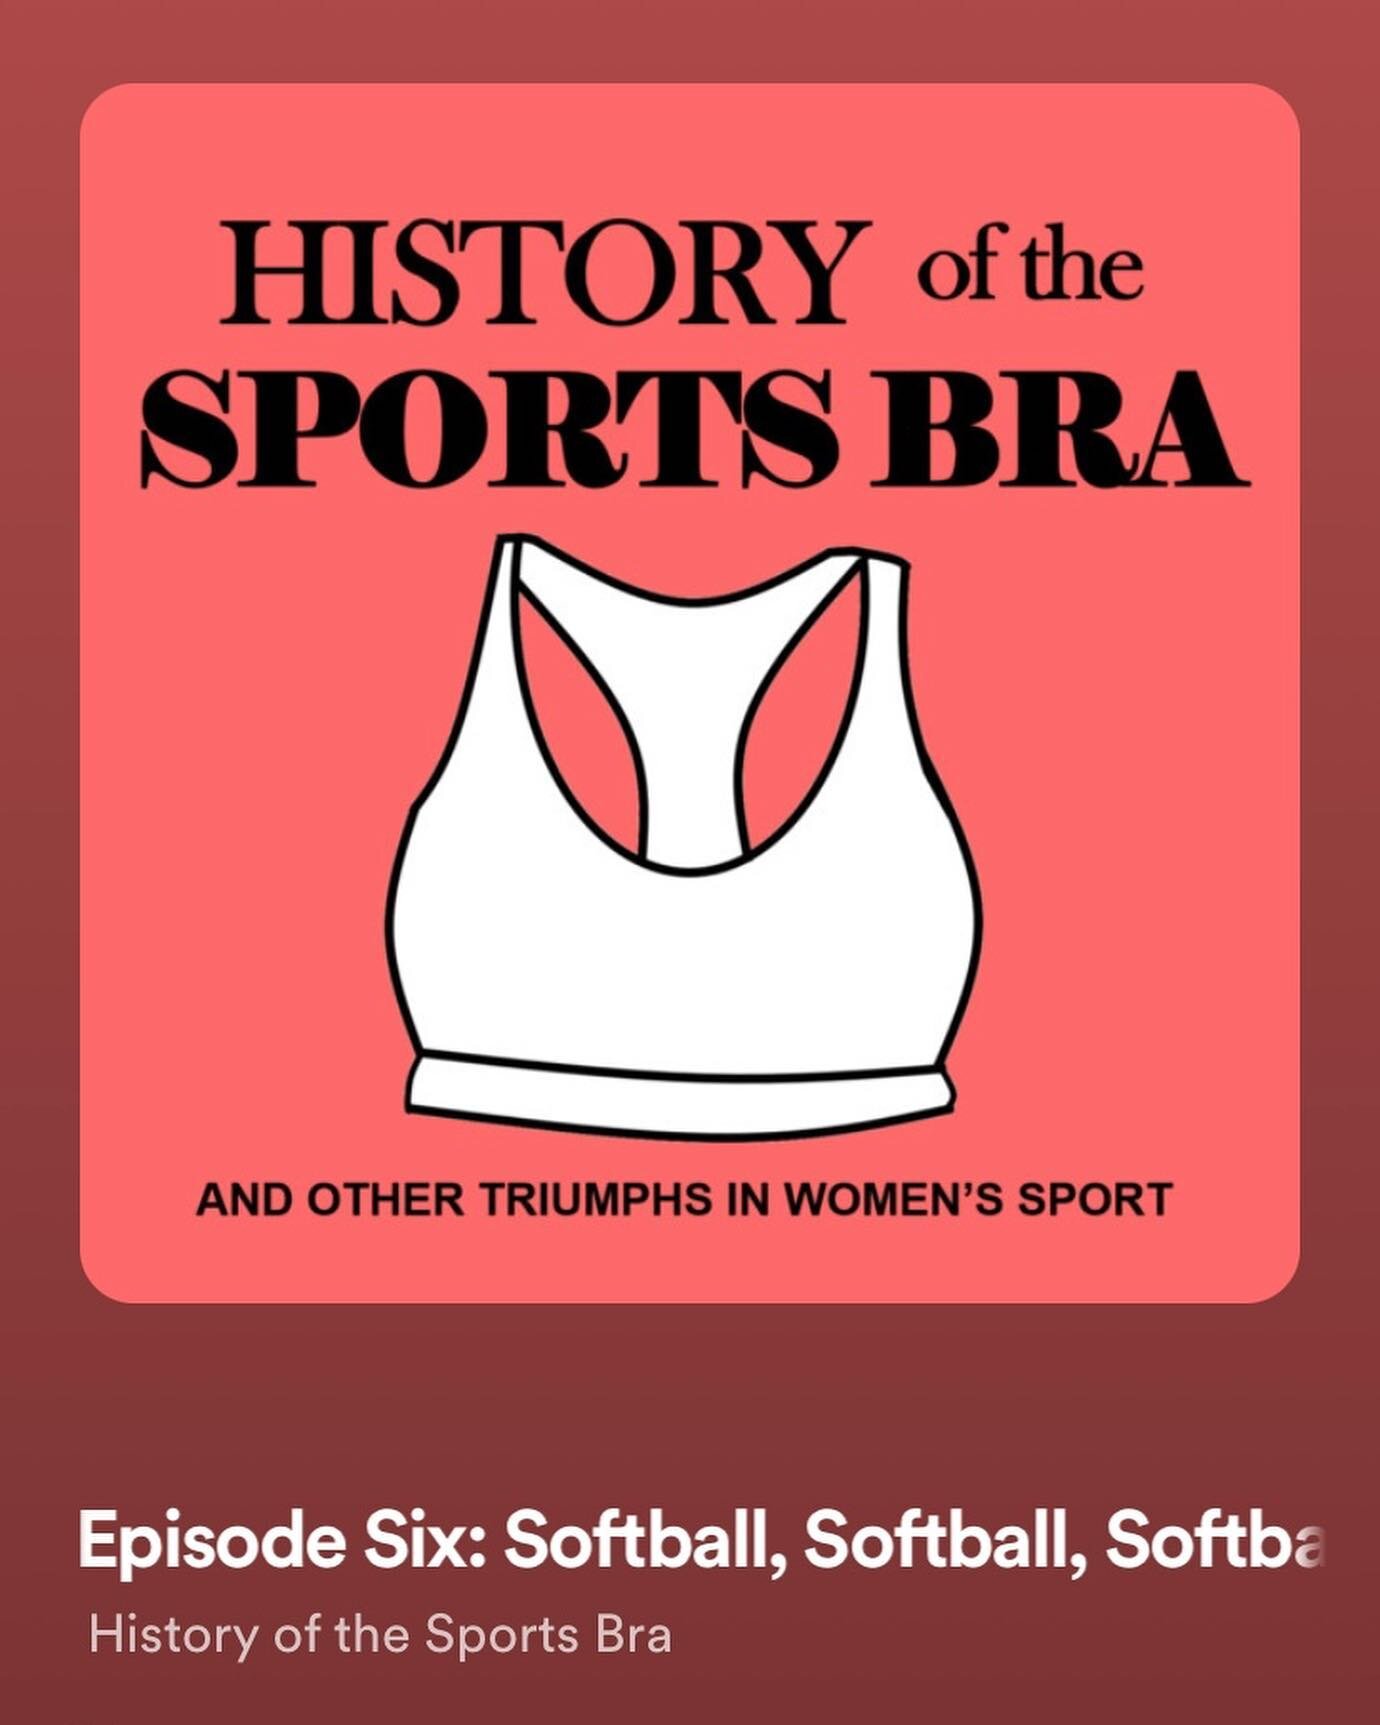 hello fellow sports enthusiasts! hop onto Spotify, Apple Pods, or hit the link in our bio for our ✨ NEW ✨ episode over at HOTSB..... drum roll please 🥁🥁🥁

SOFTBALL 🥎